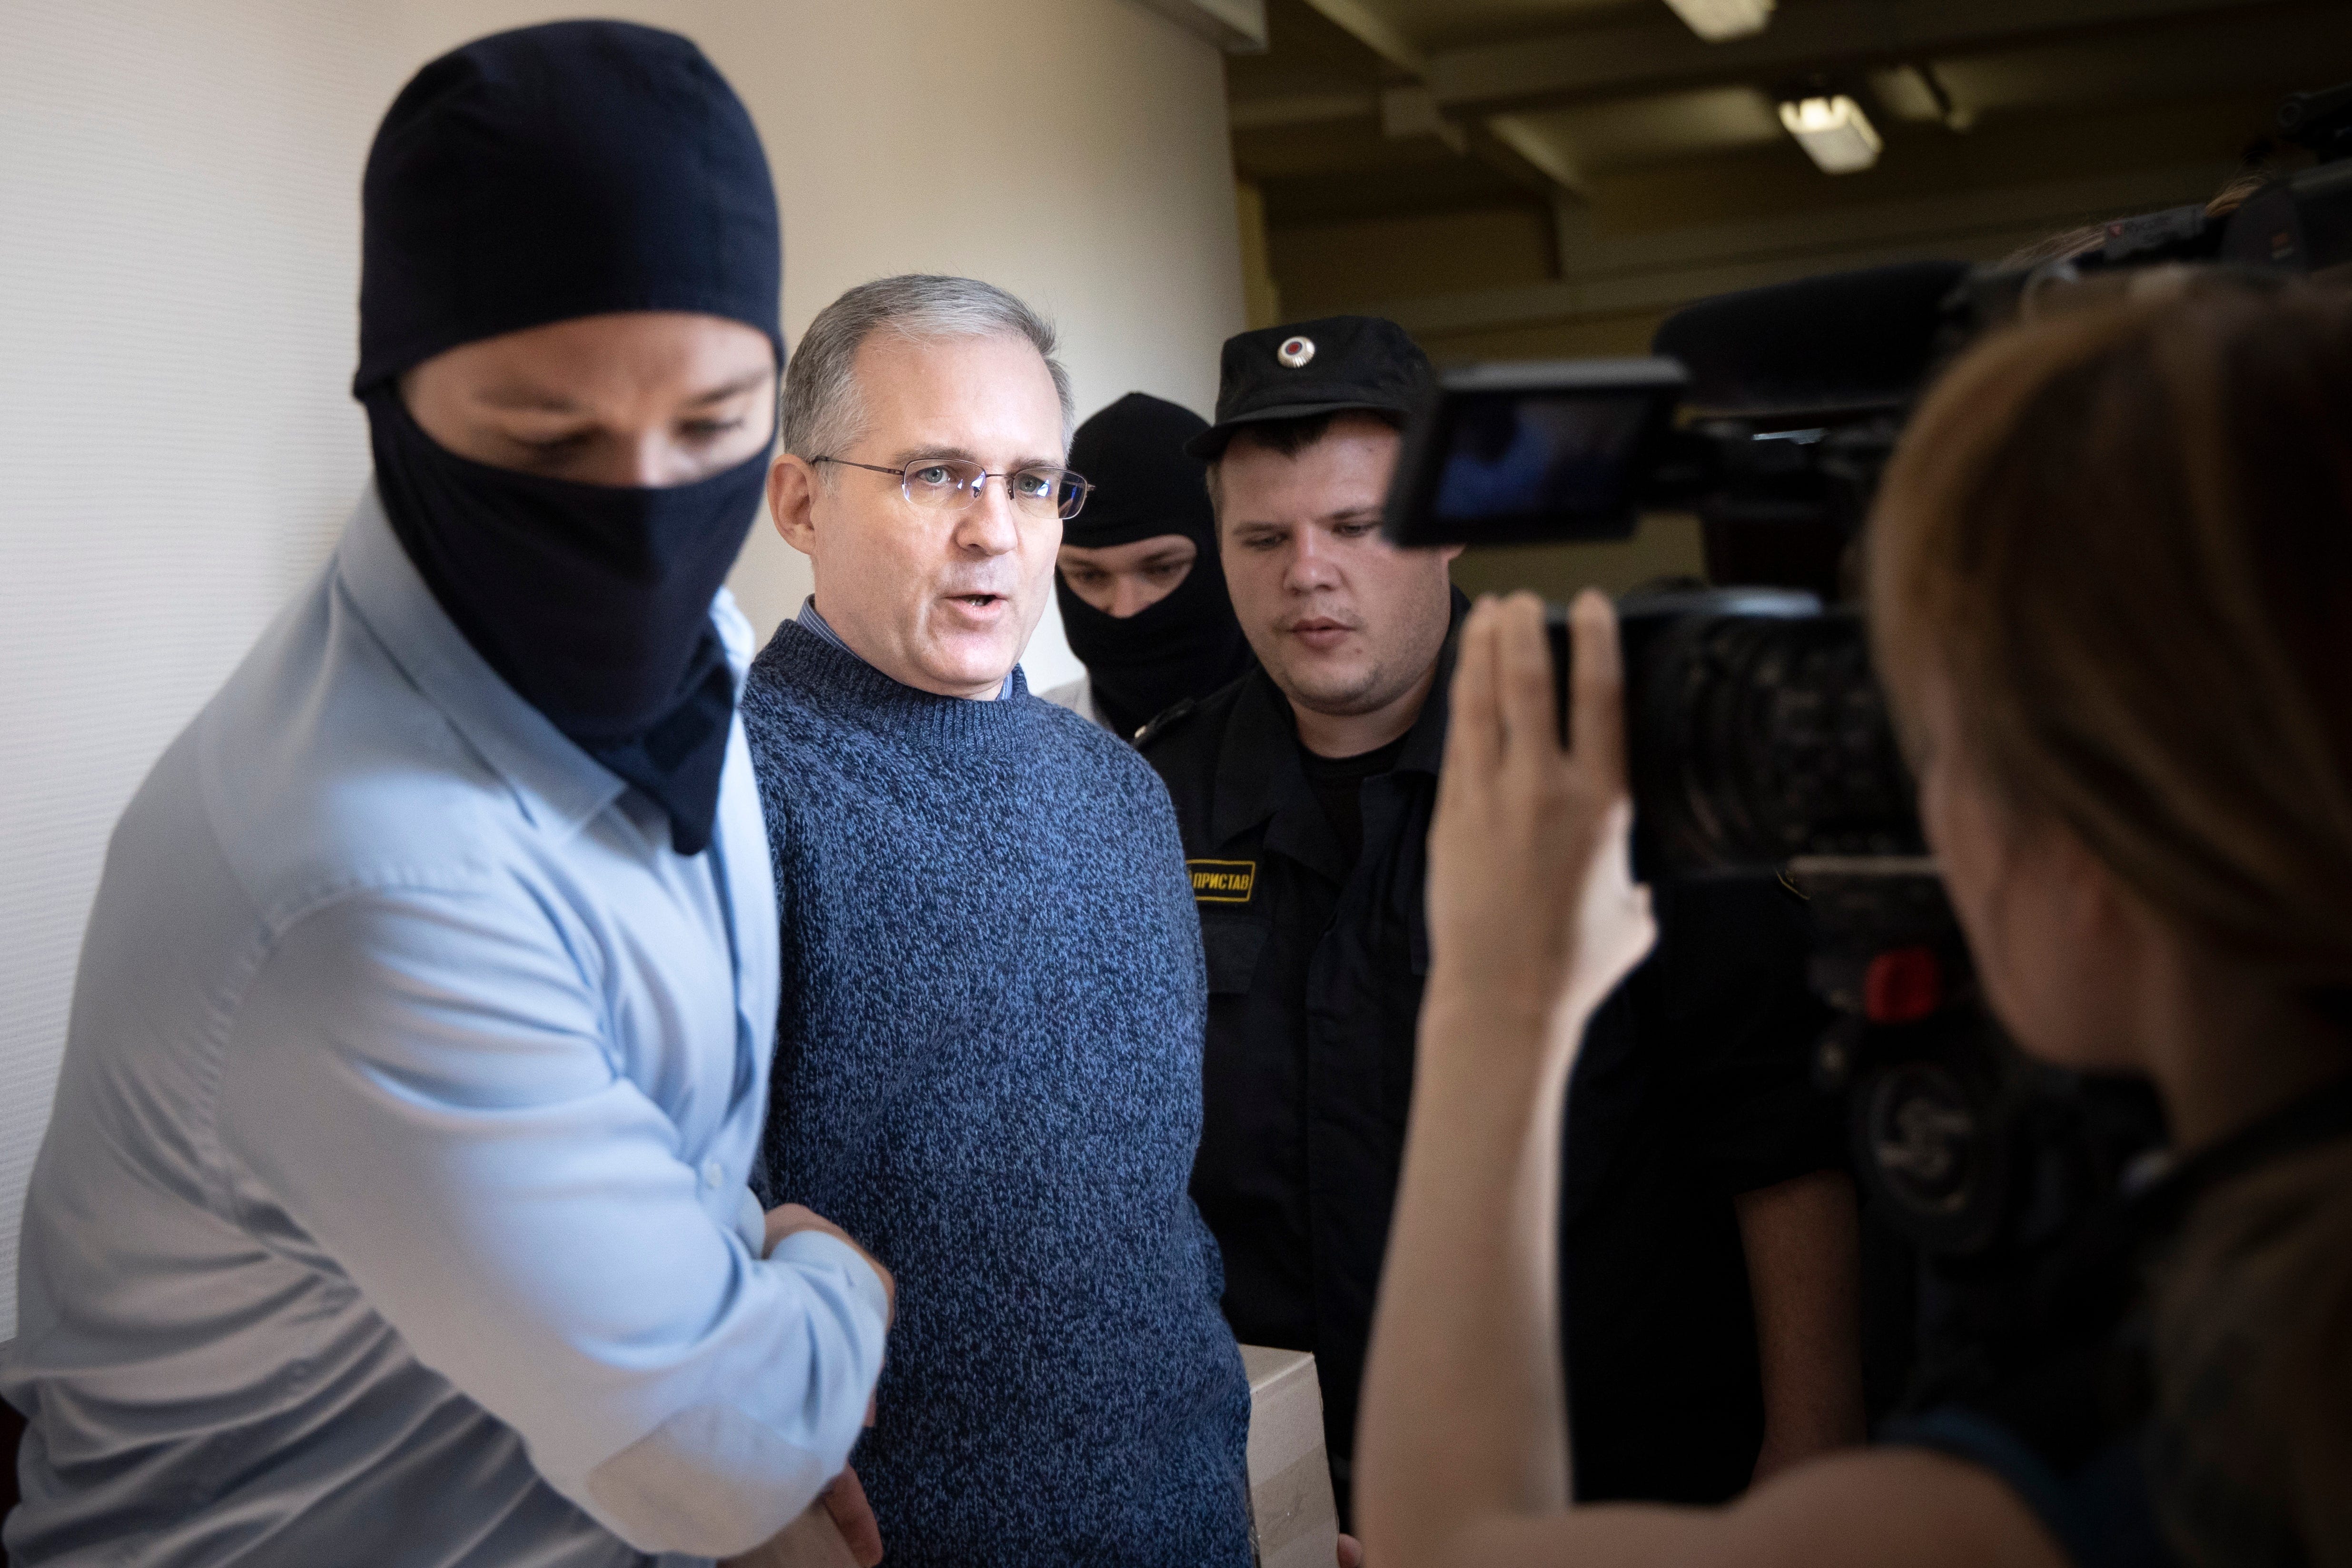 Paul Whelan, second from left, was arrested and accused of spying in Moscow. He speaks to a journalist as he escorted by Russian Federal Security Service officers into a courtroom in Moscow, Russia, Friday, Aug. 23, 2019.